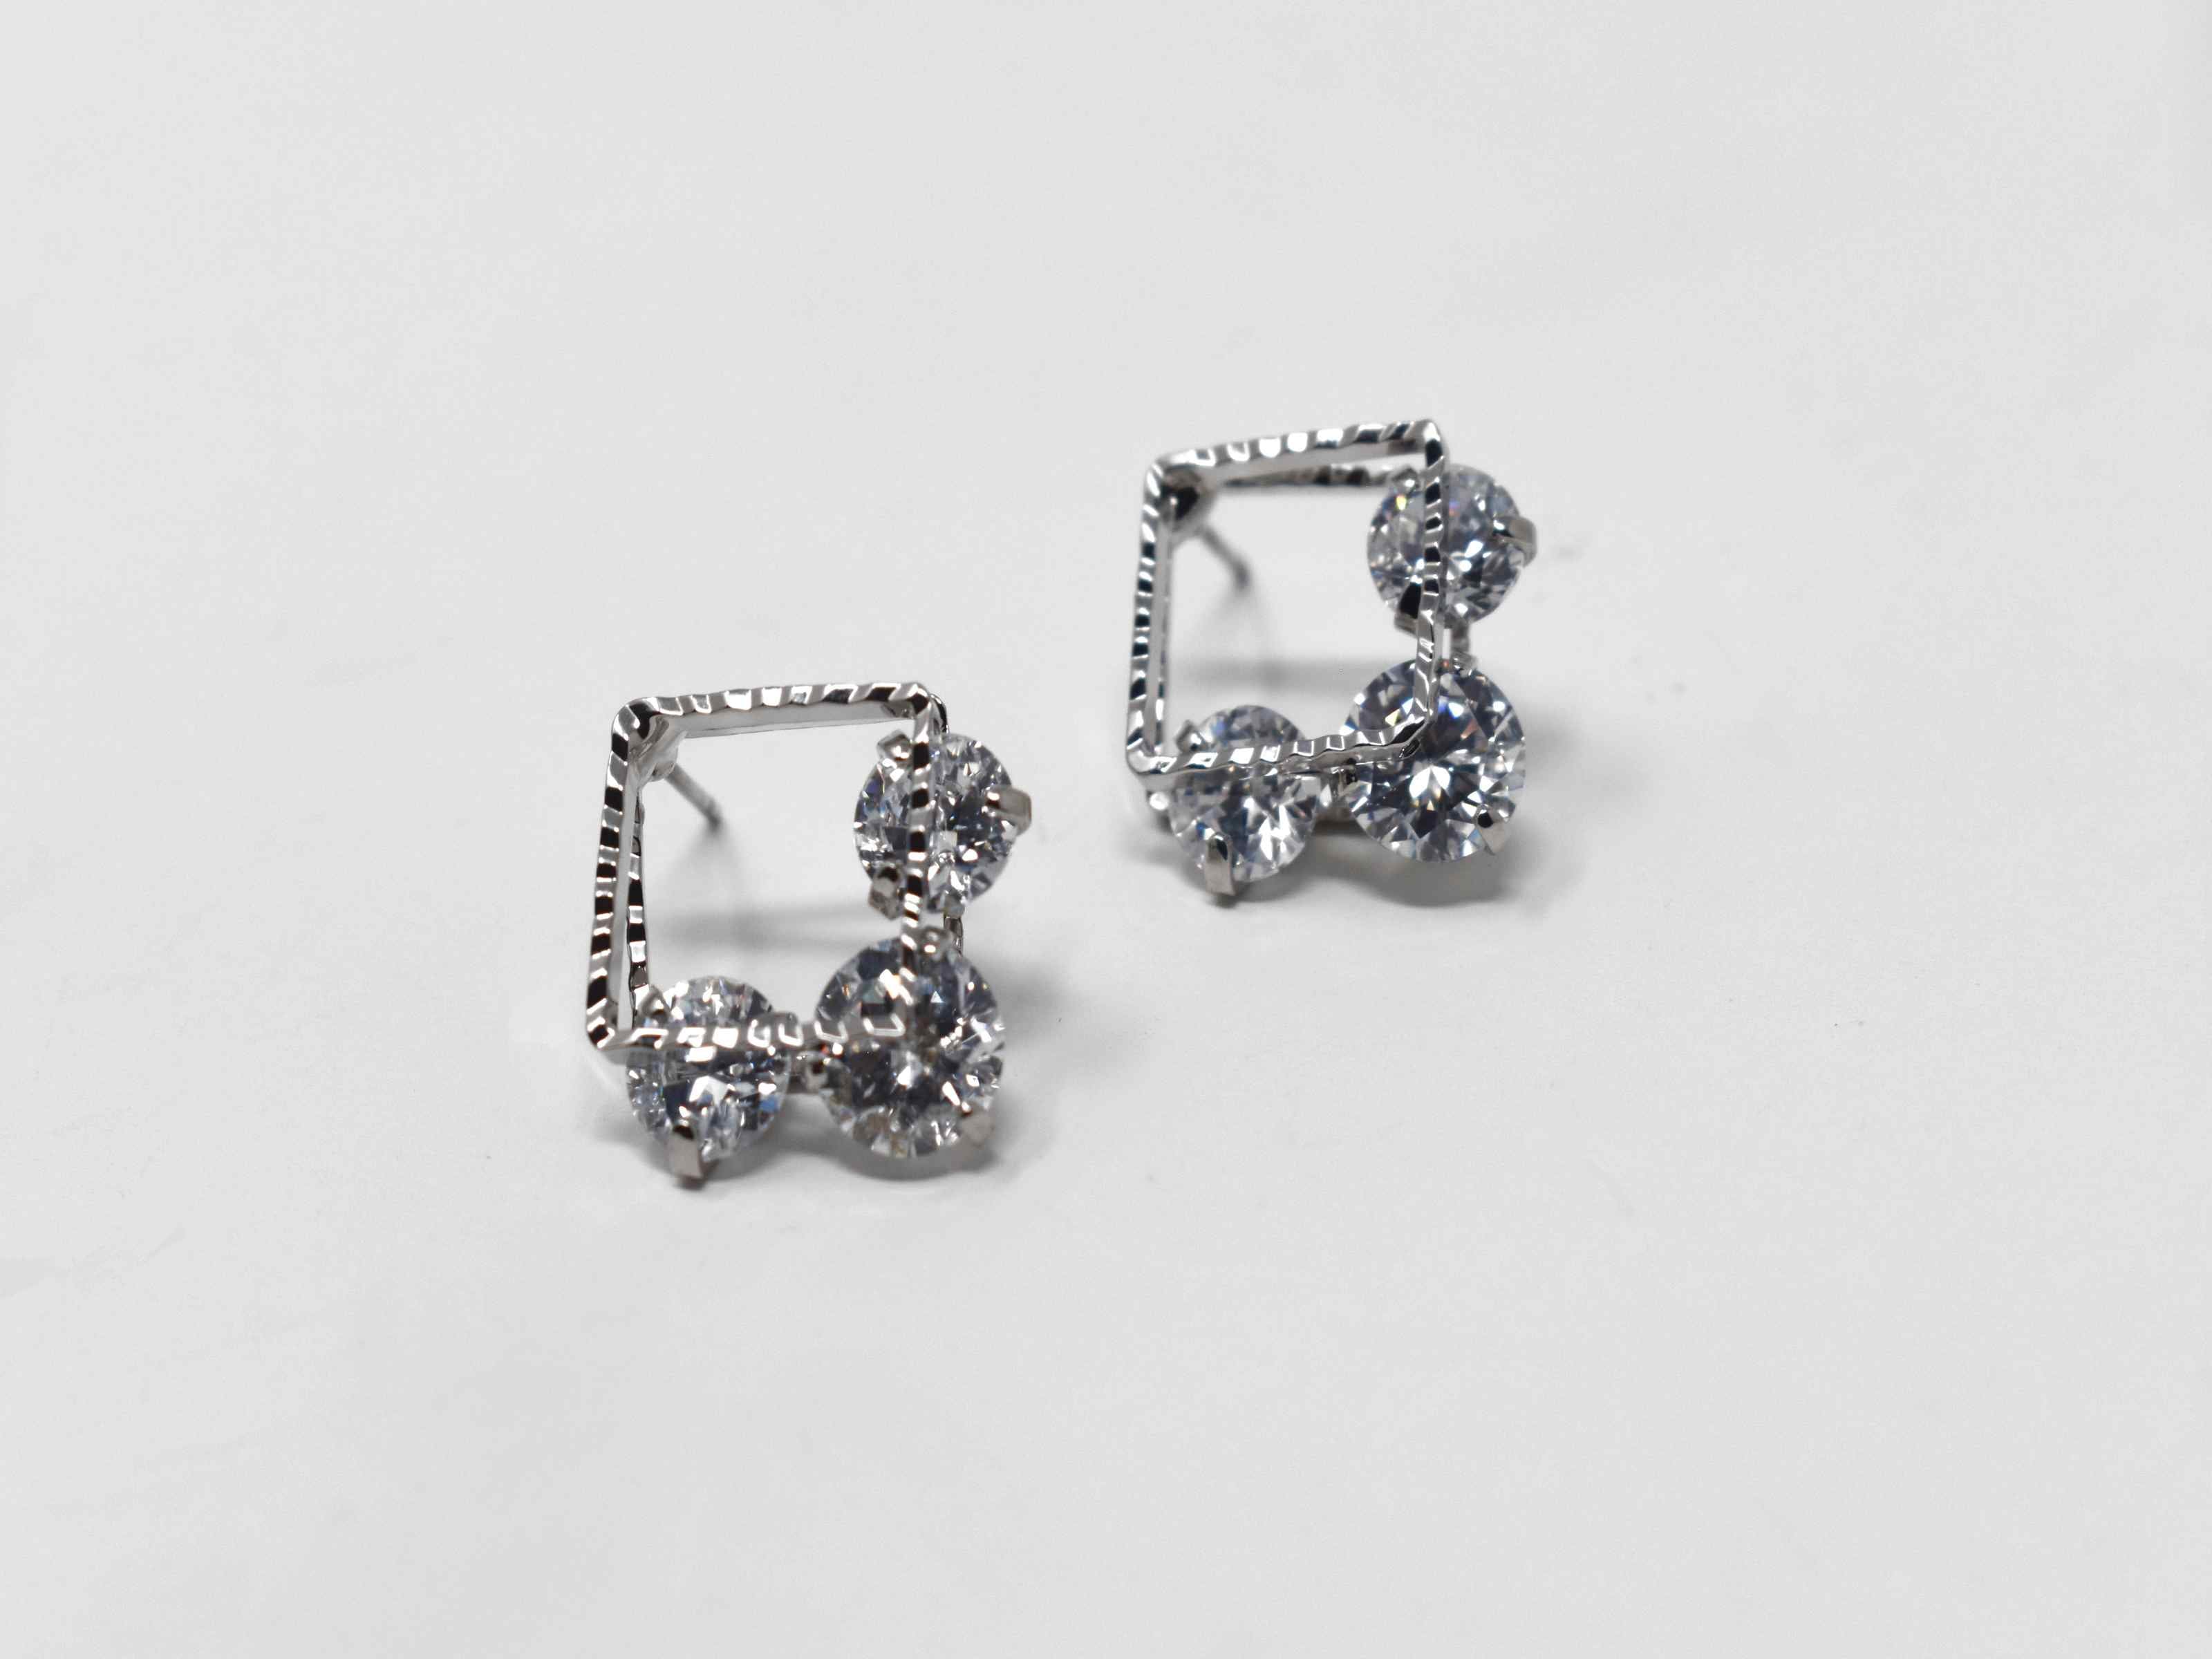 Our beautifully crafted daniella earrings are a must have essential. These silver double square earrings are adorned with stones running between both squares. It is 3/4 of an inch in length with a push back clasp.